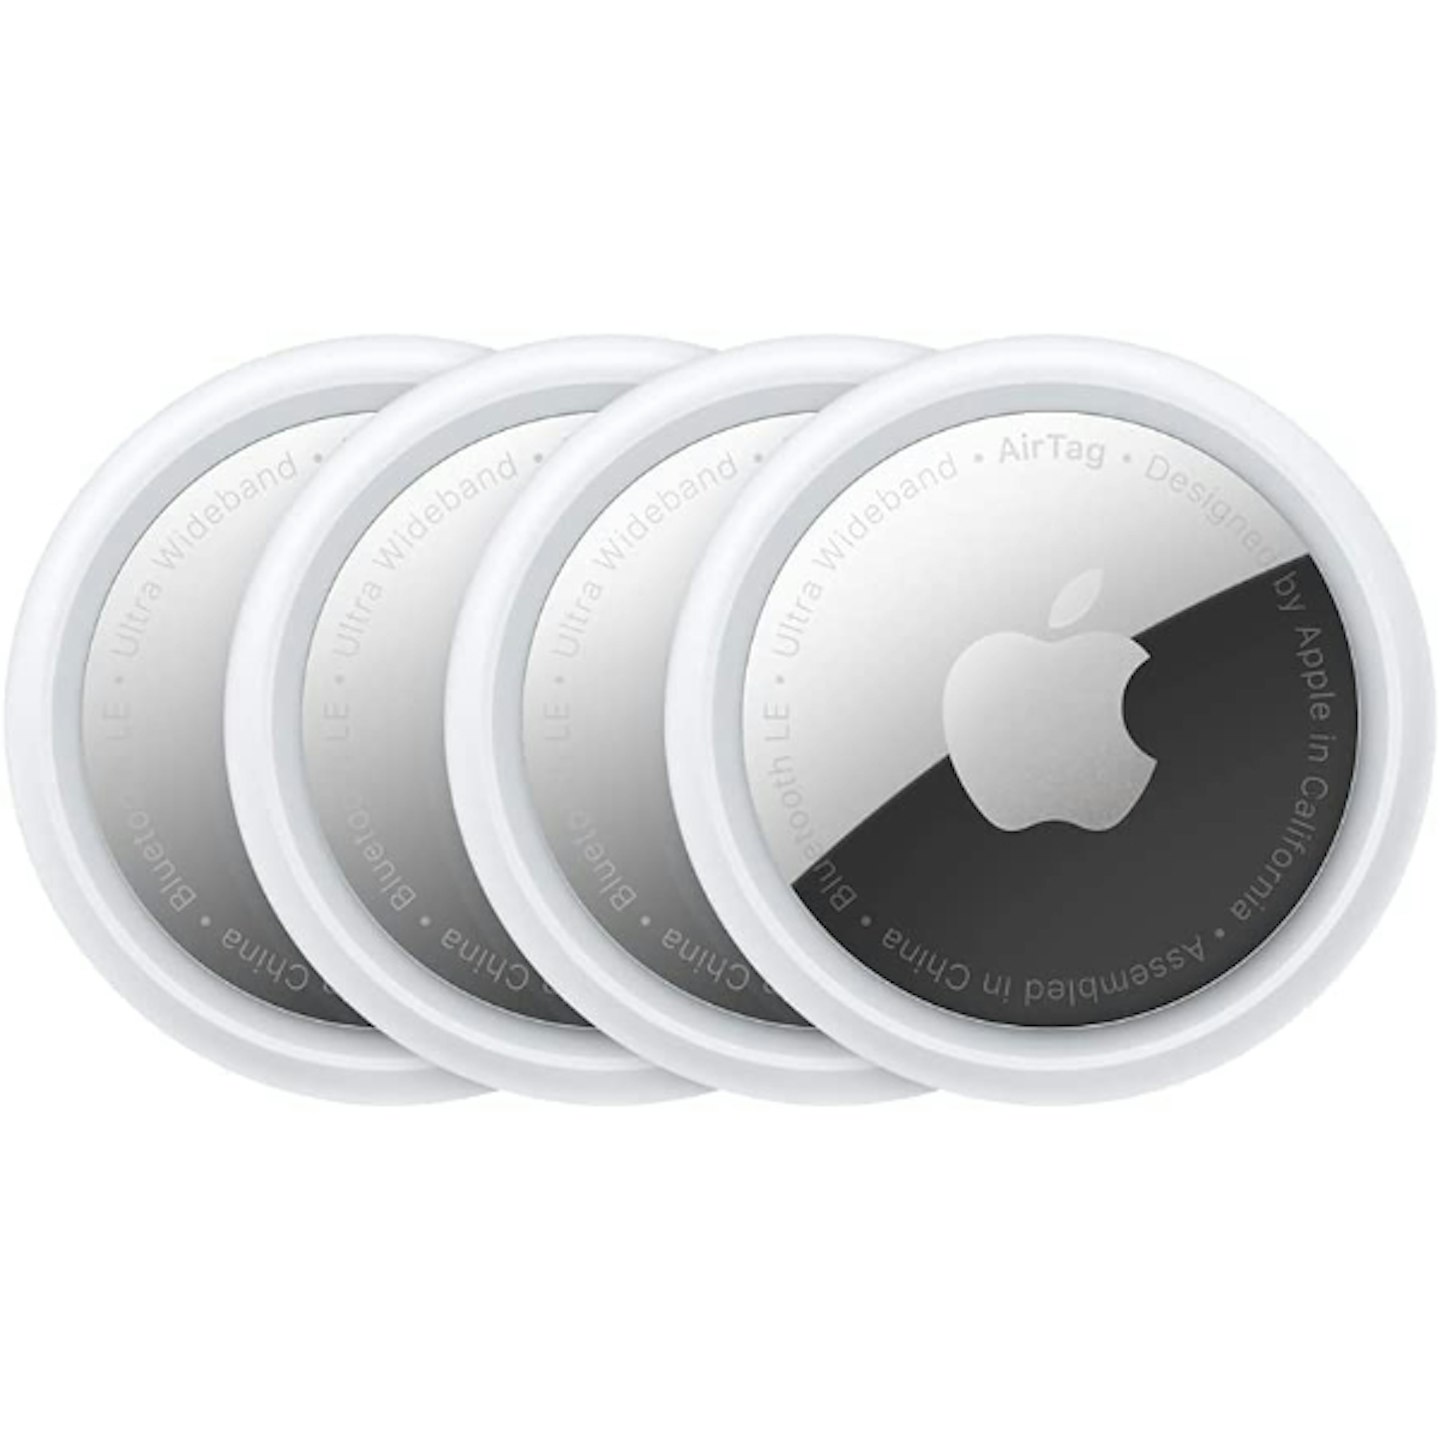 New Apple AirTag - Four Pack